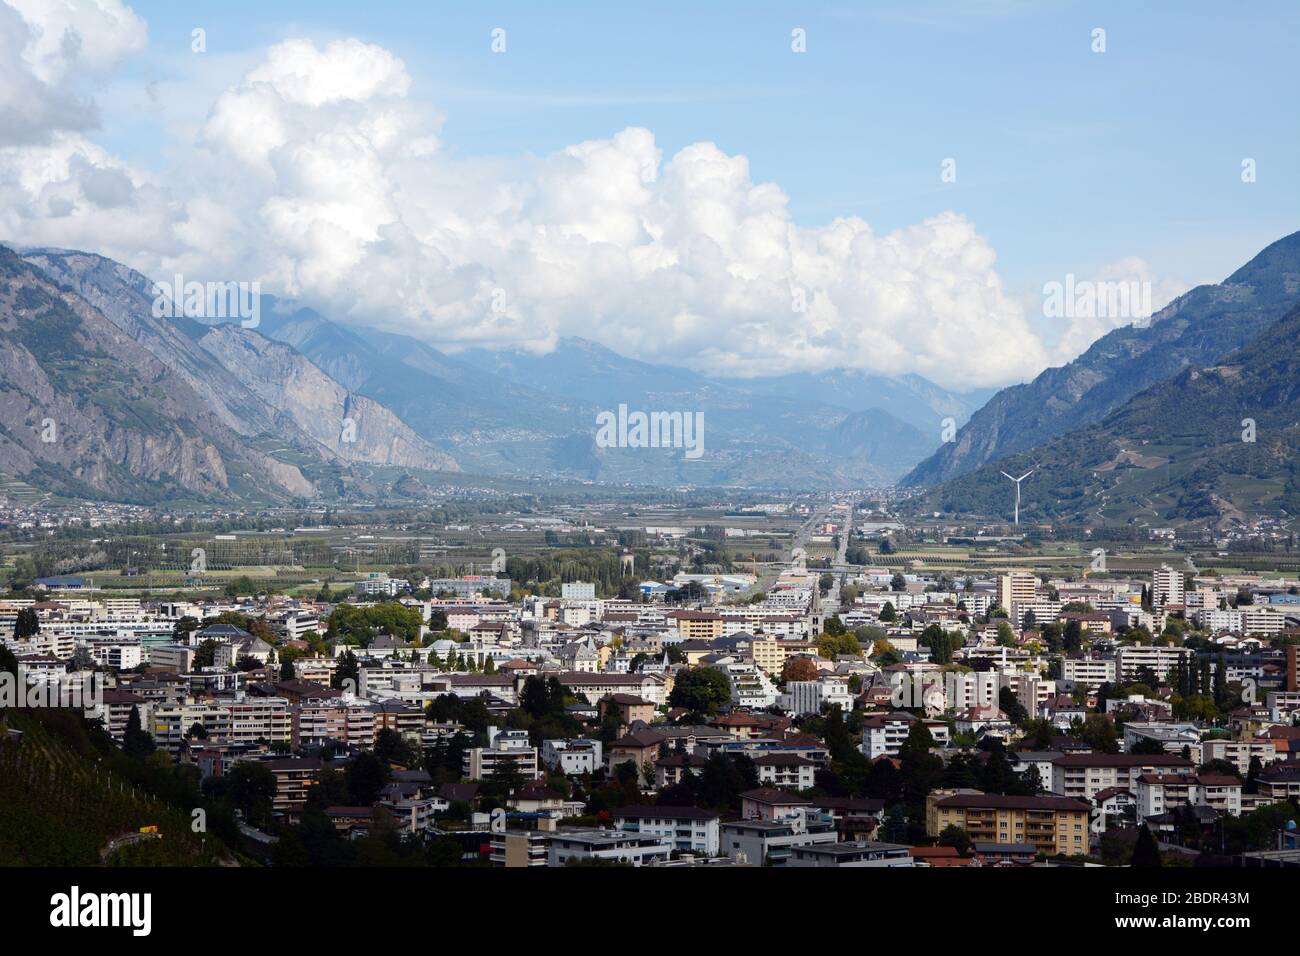 The Swiss city of Martigny and surrounding vineyards, beneath the Alps, in the Rhone River Valley, canton of Valais, Switzerland. Stock Photo